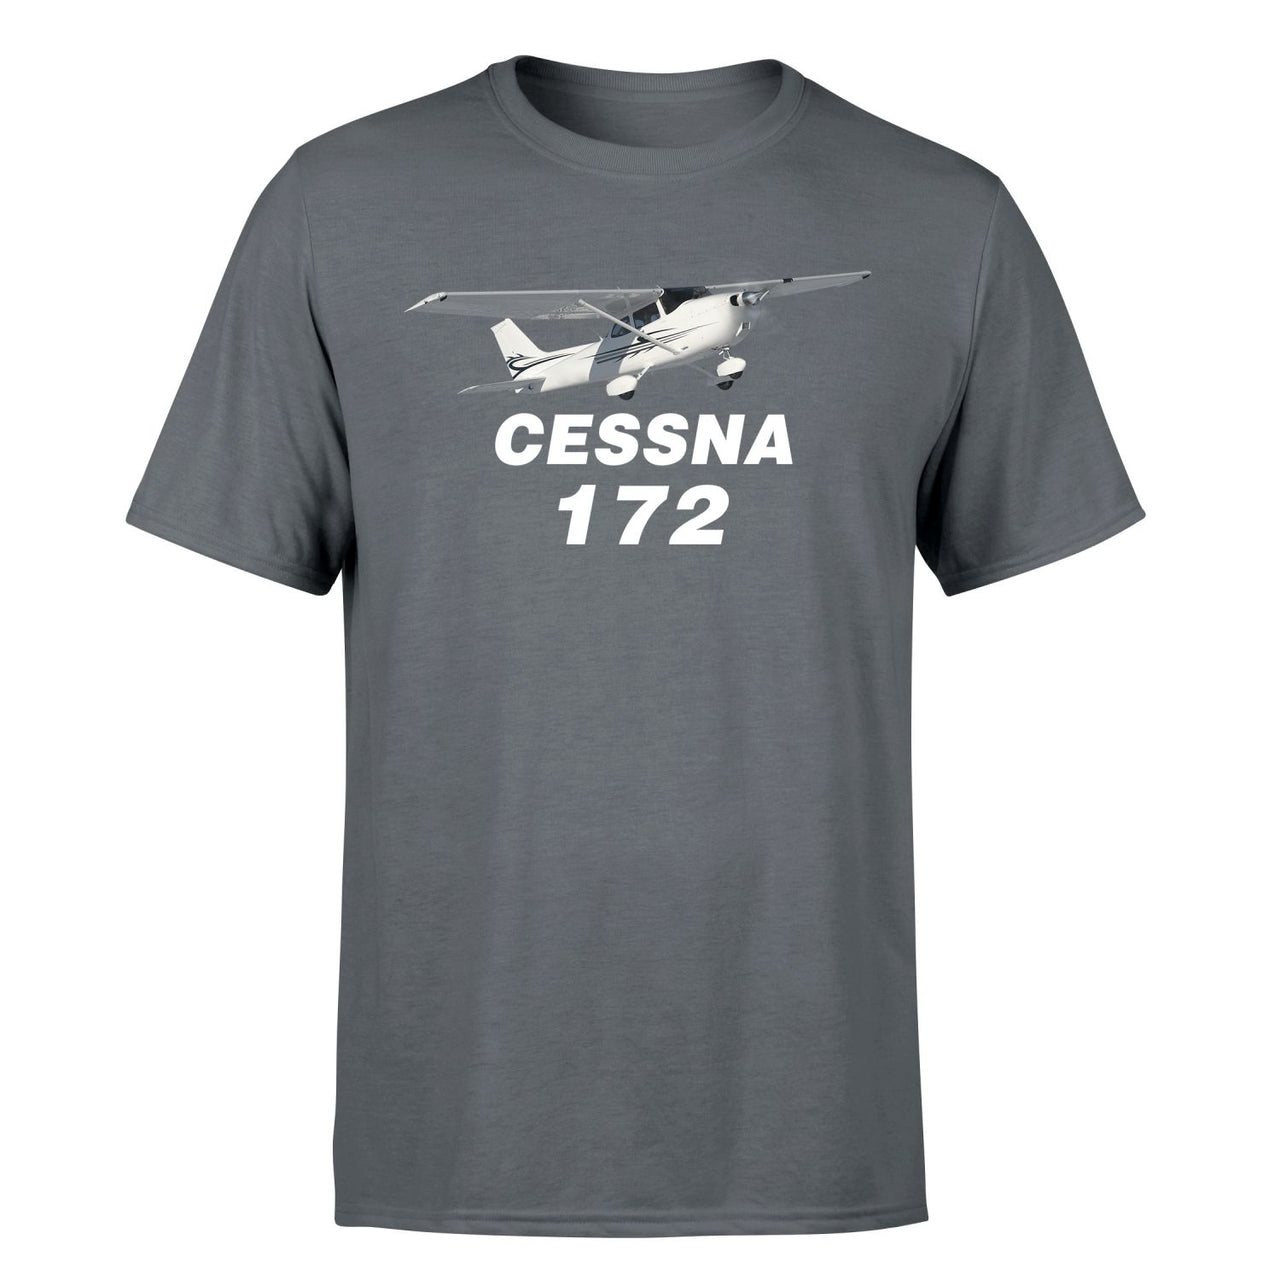 The Cessna 172 Designed T-Shirts